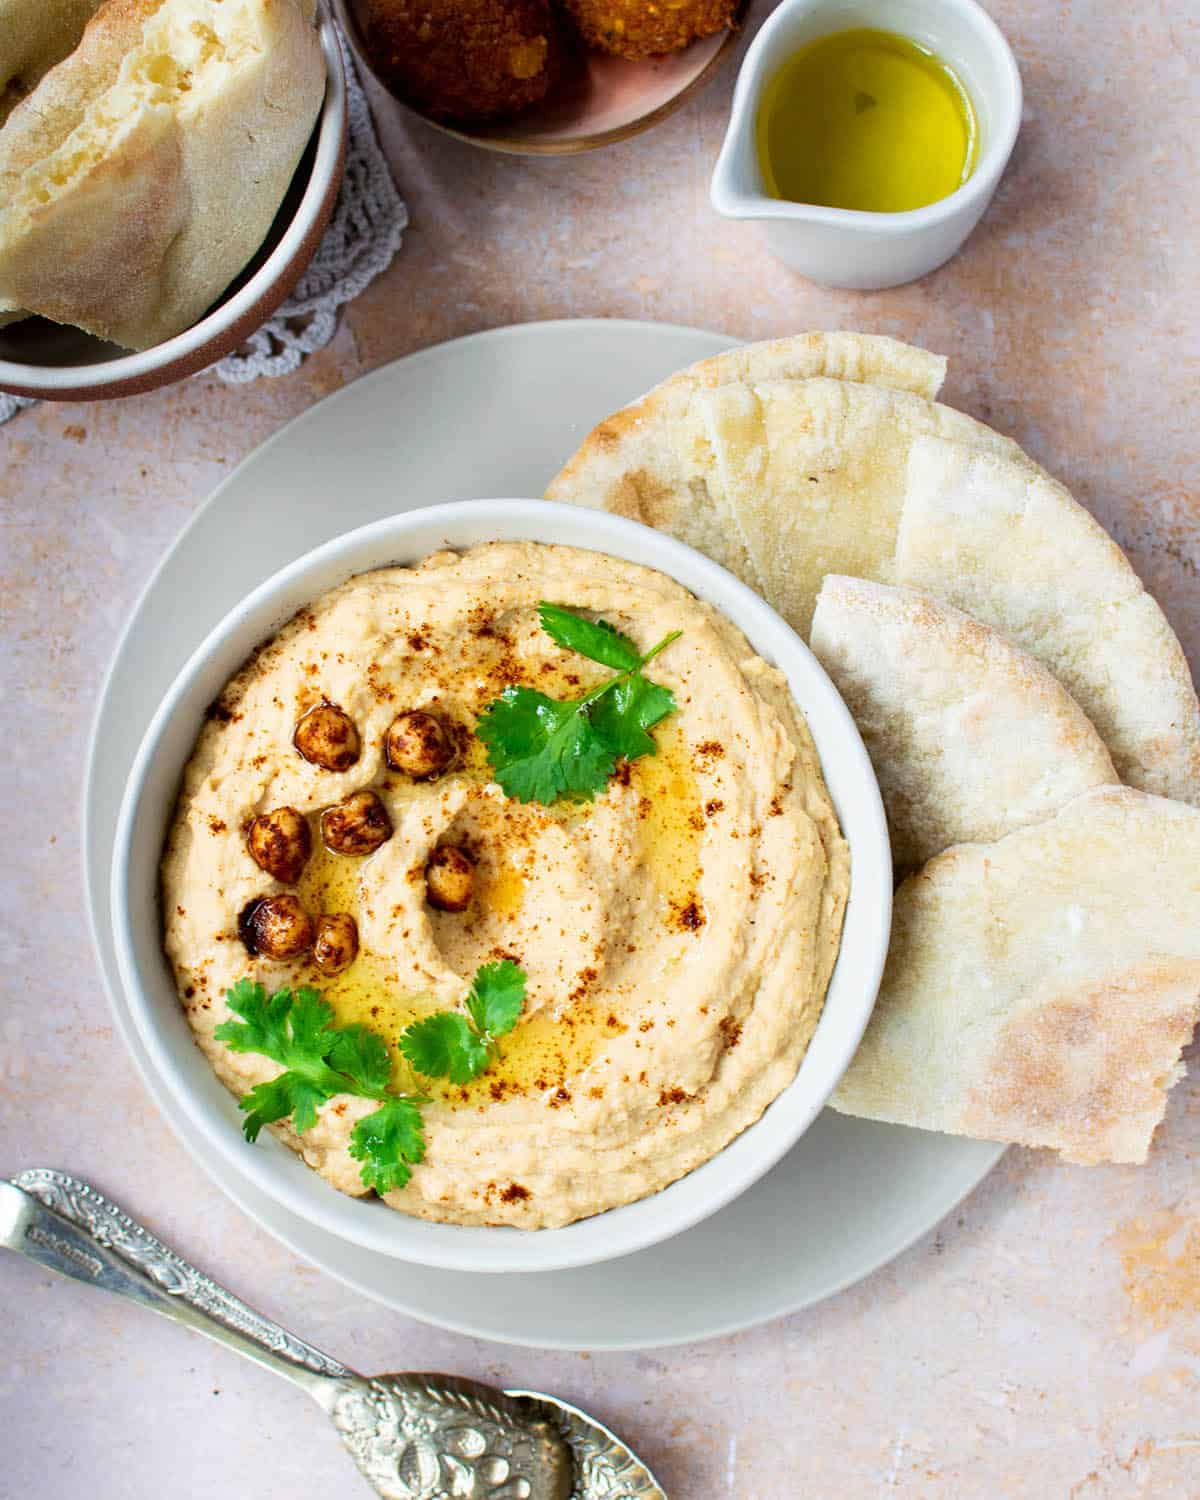 Lebanese hummus in a white bowl with pitta bread, olive oil and falafels nearby